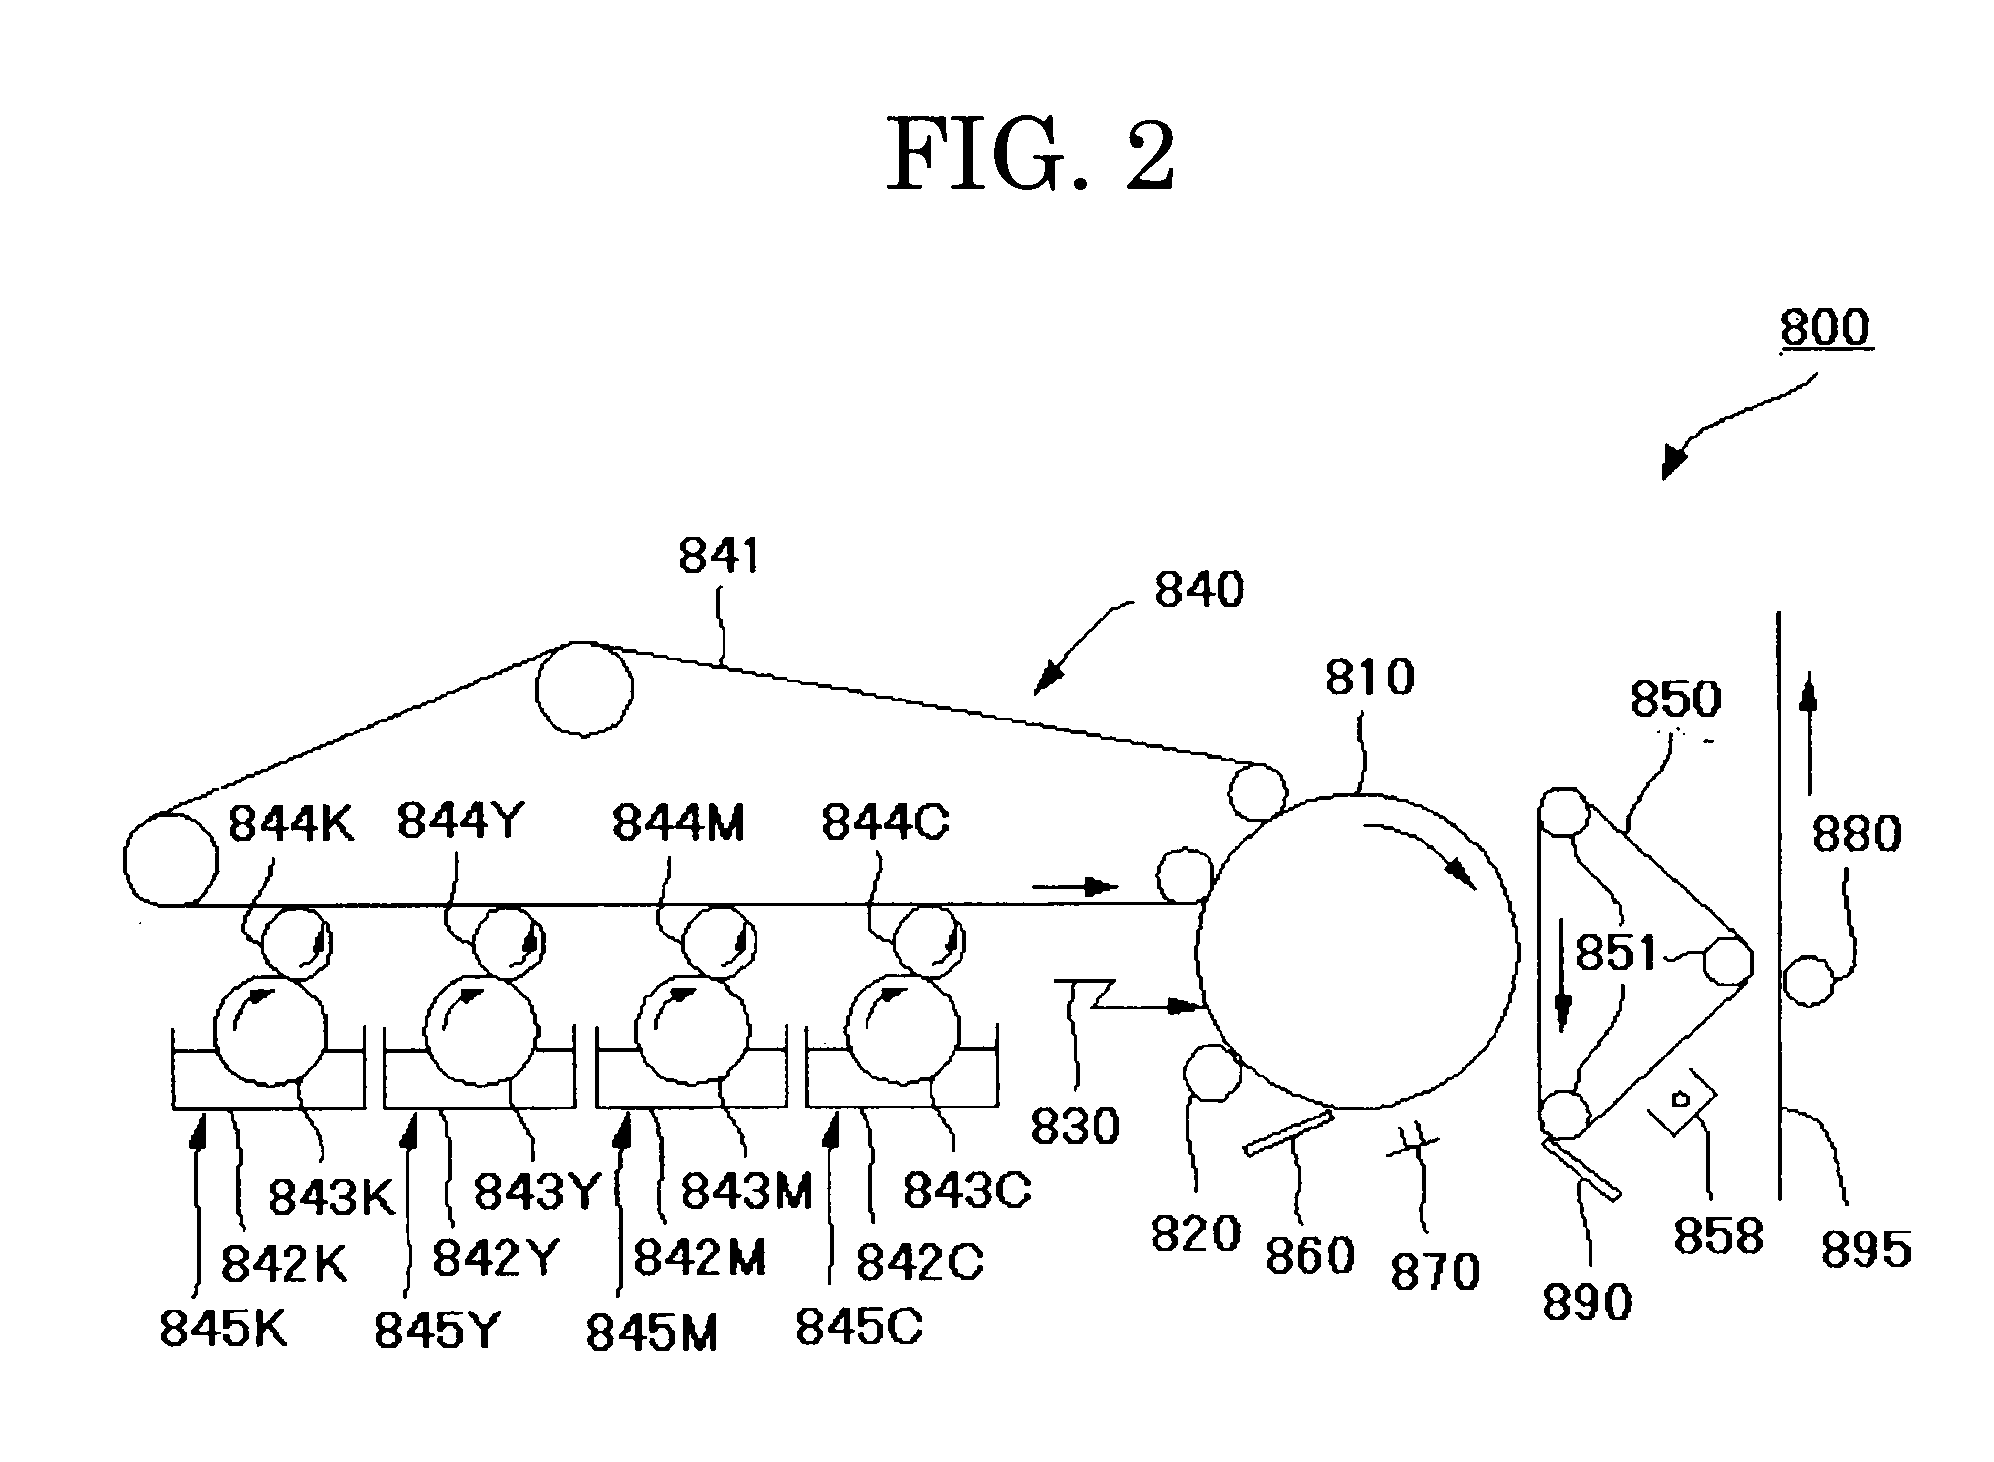 Toner for developing electrostatic charge image, image forming method and image forming apparatus